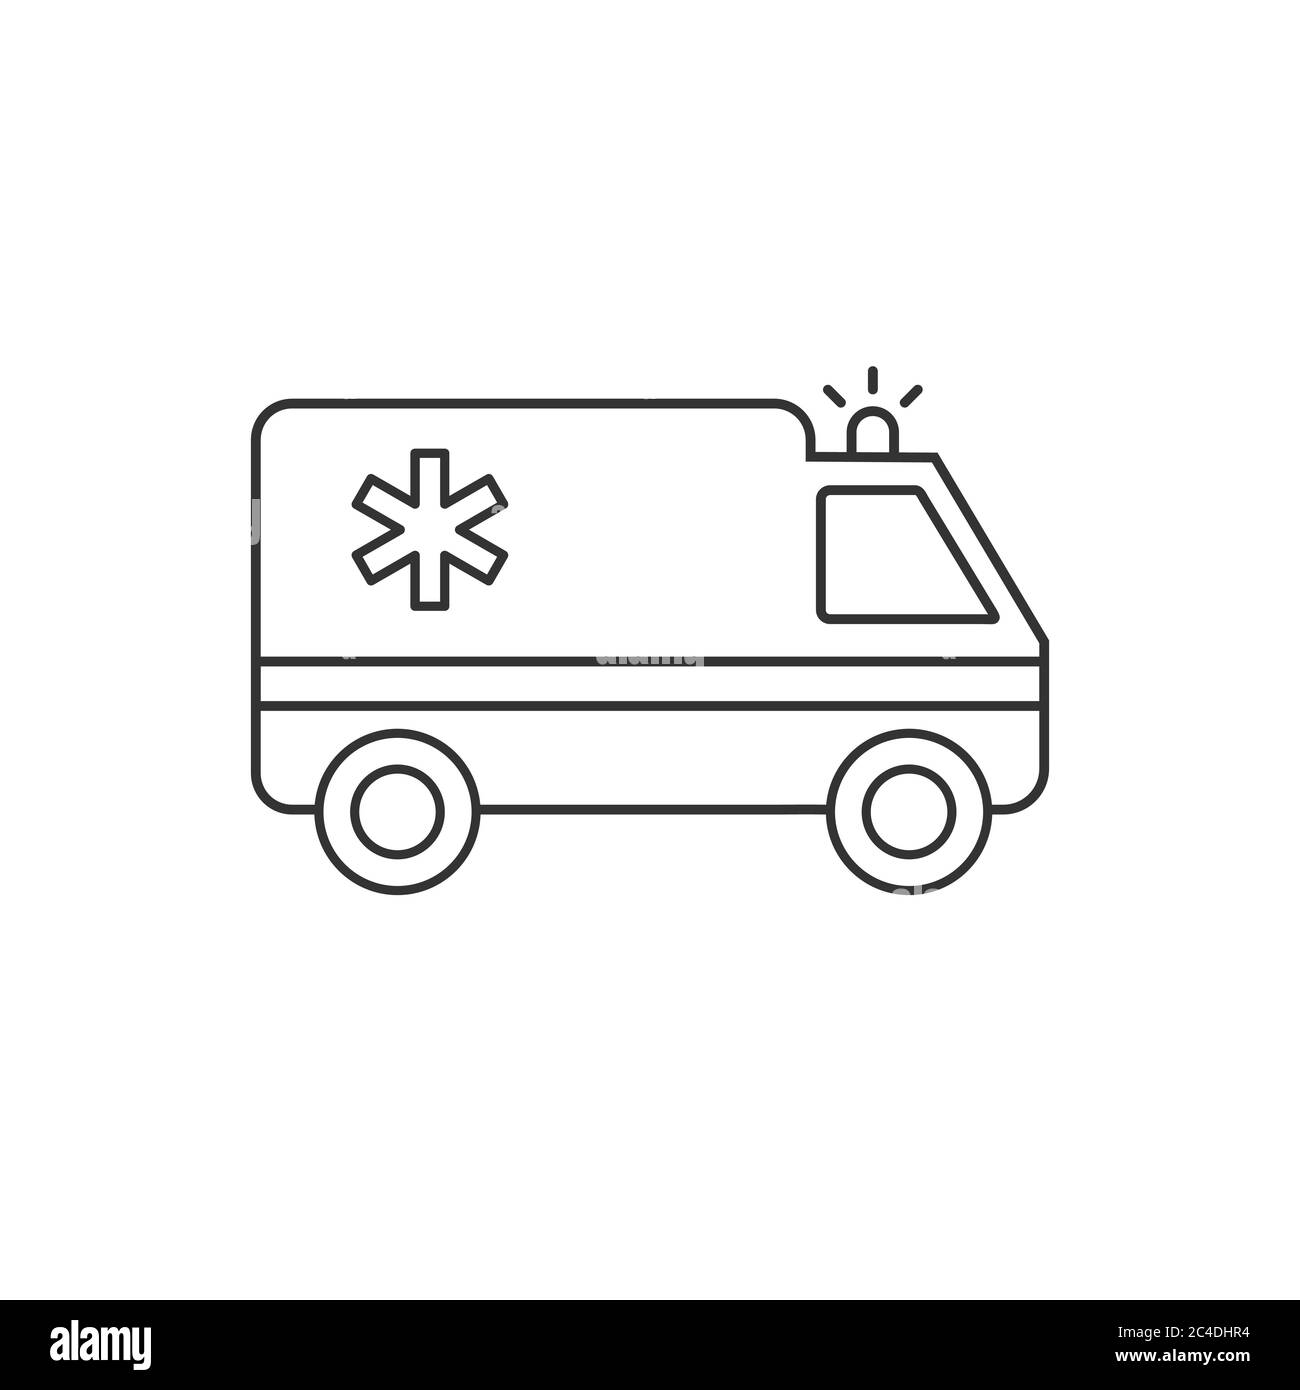 Ambulance line icon. Medical transportation vehicle. Urgent response, rescue and evacuation concept. Black outline on white background. Vector flat. Stock Vector